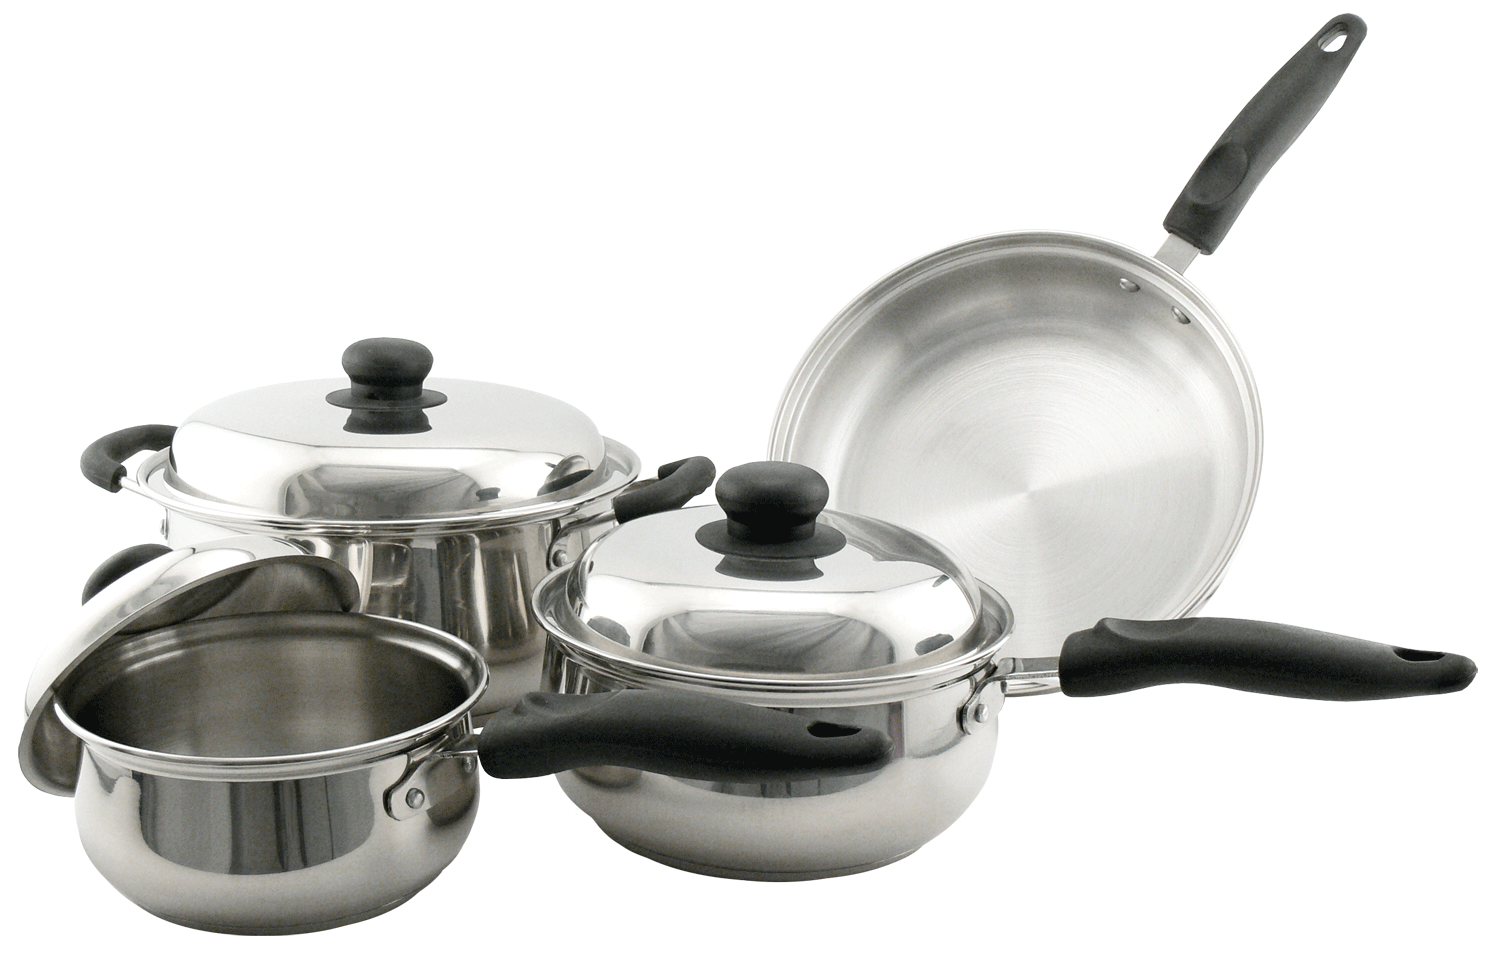 AMC classic 7 pc stainless steel cooking set